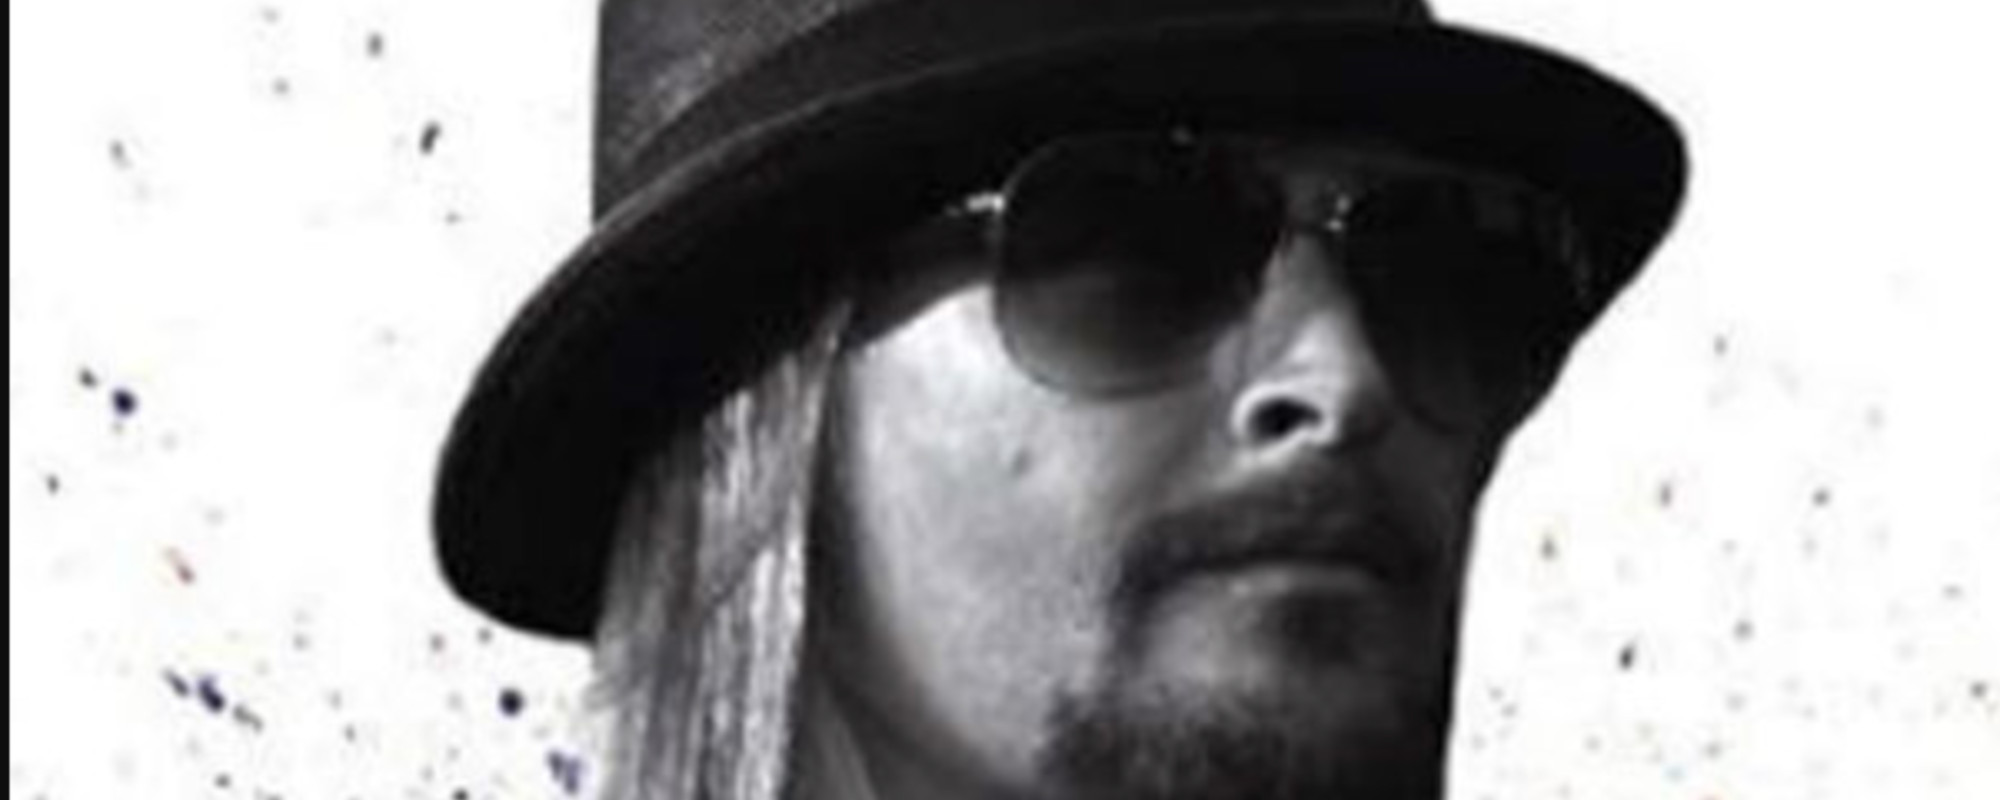 Kid Rock Calls Out “Snowflakes,” Releases New Song, “Don’t Tell Me How To Live”